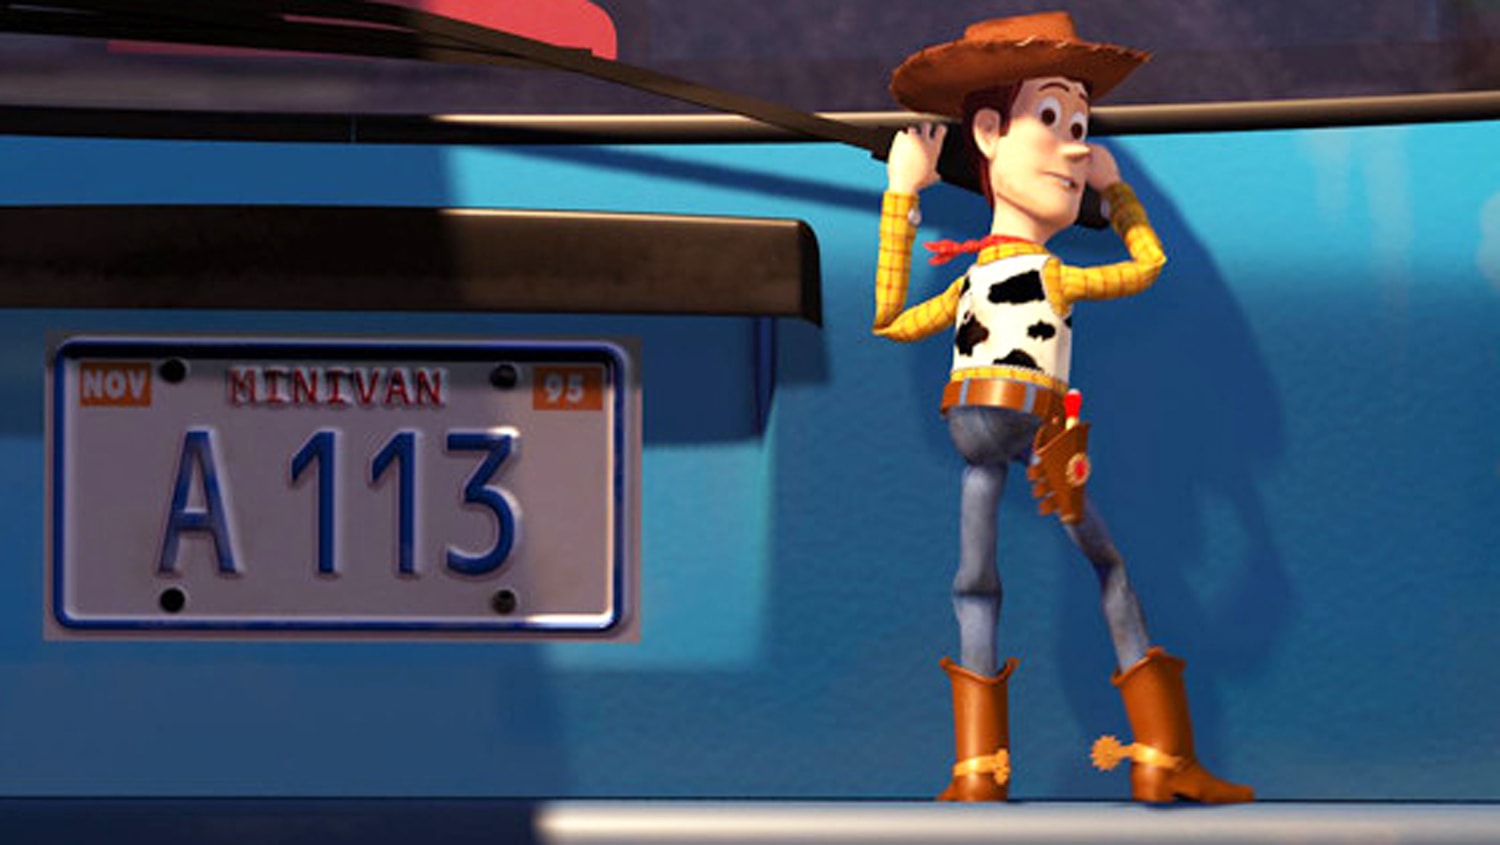 The story behind A113, mysterious number in every Pixar movie